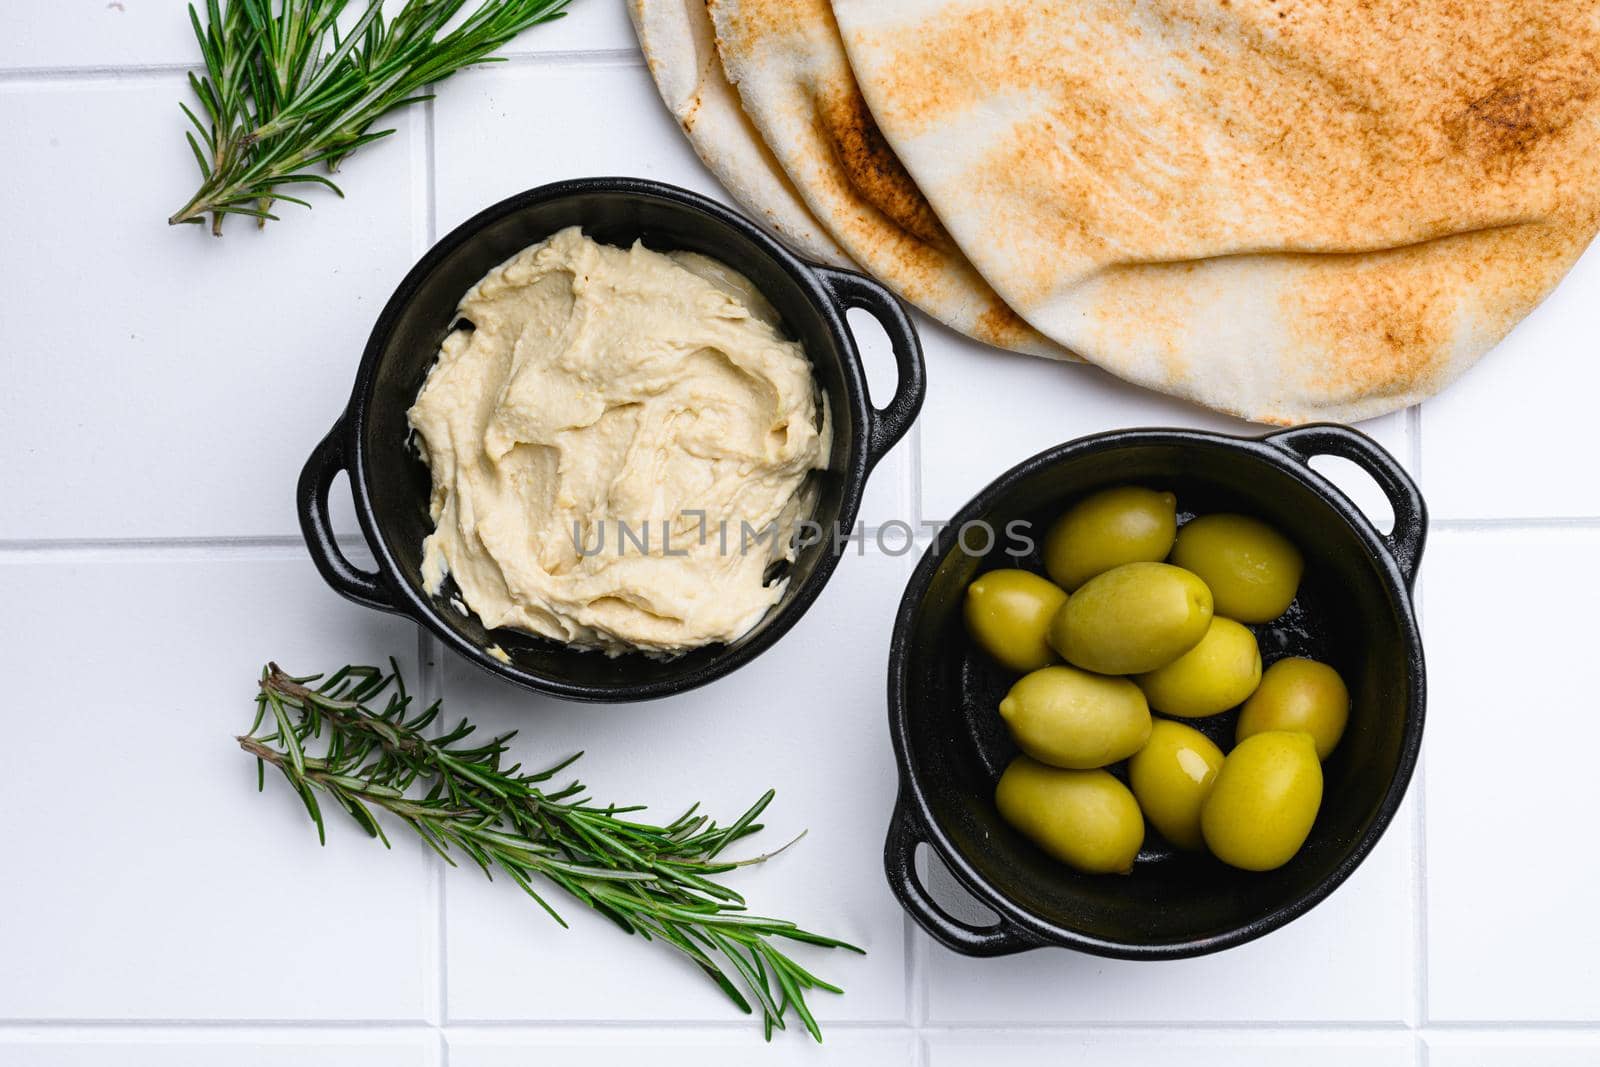 Hummus and wheat flatbread, on white ceramic squared tile table background, top view flat lay